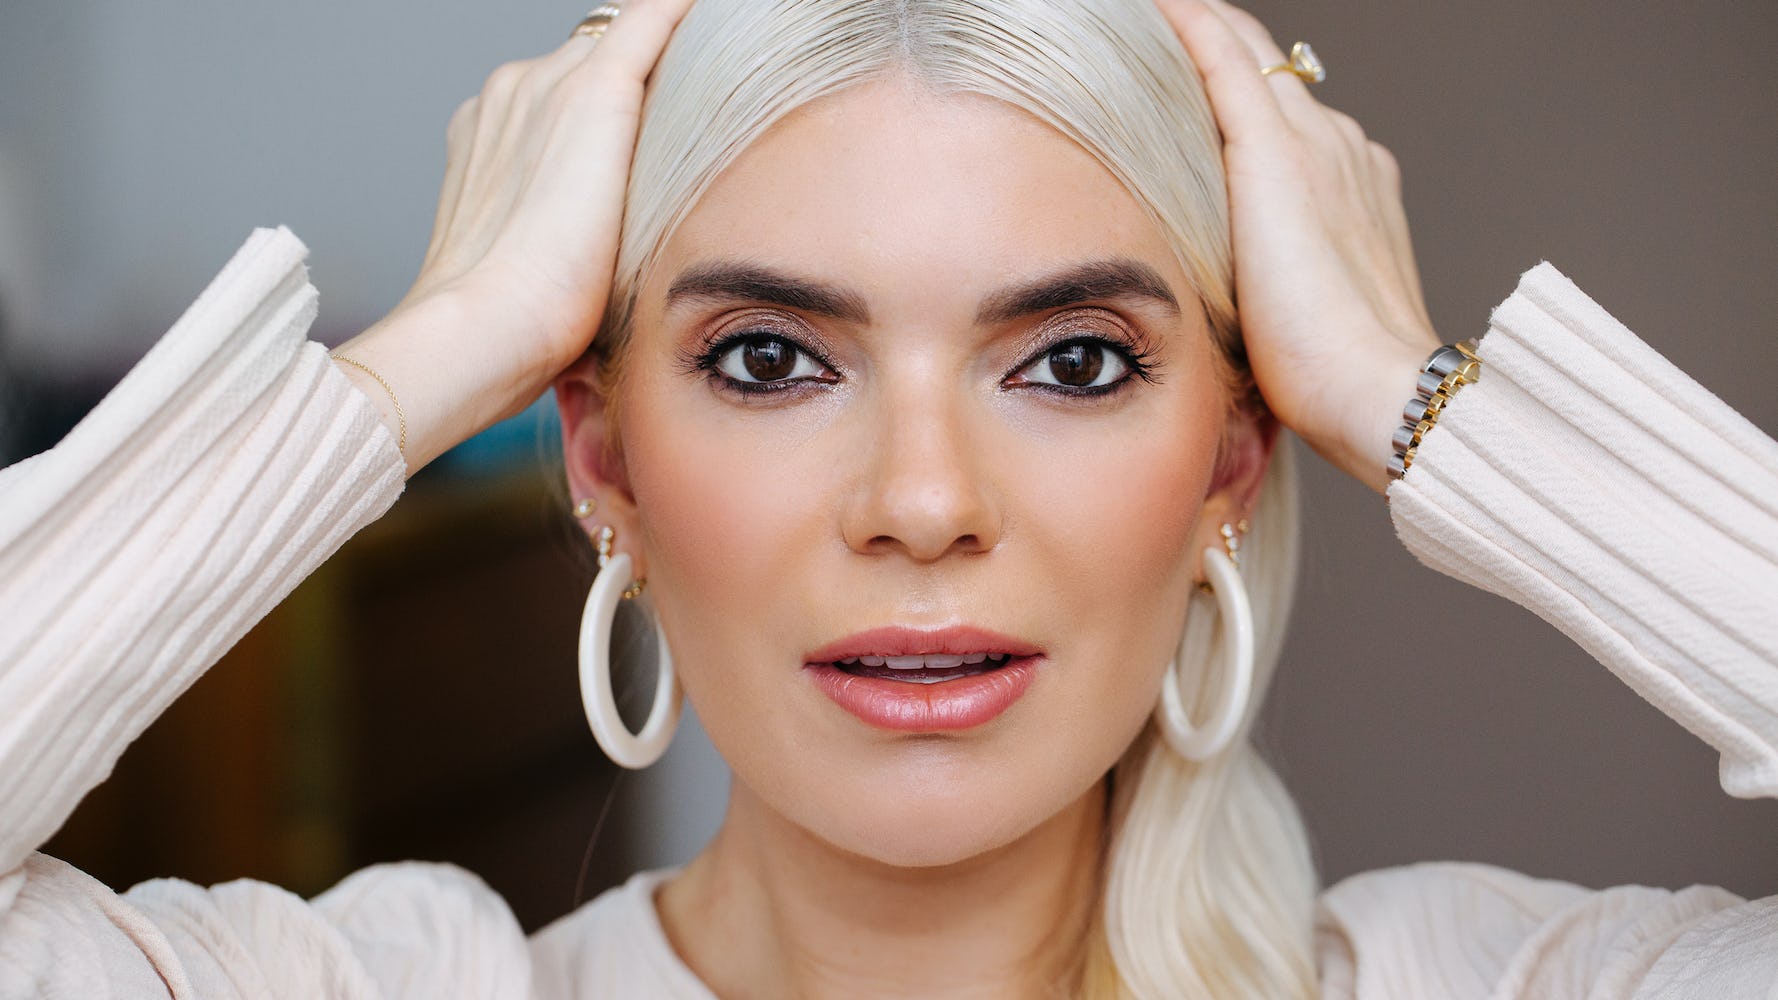 Carly Cardellino Reveals Her Skincare Essentials, Injectables Routine, and More'